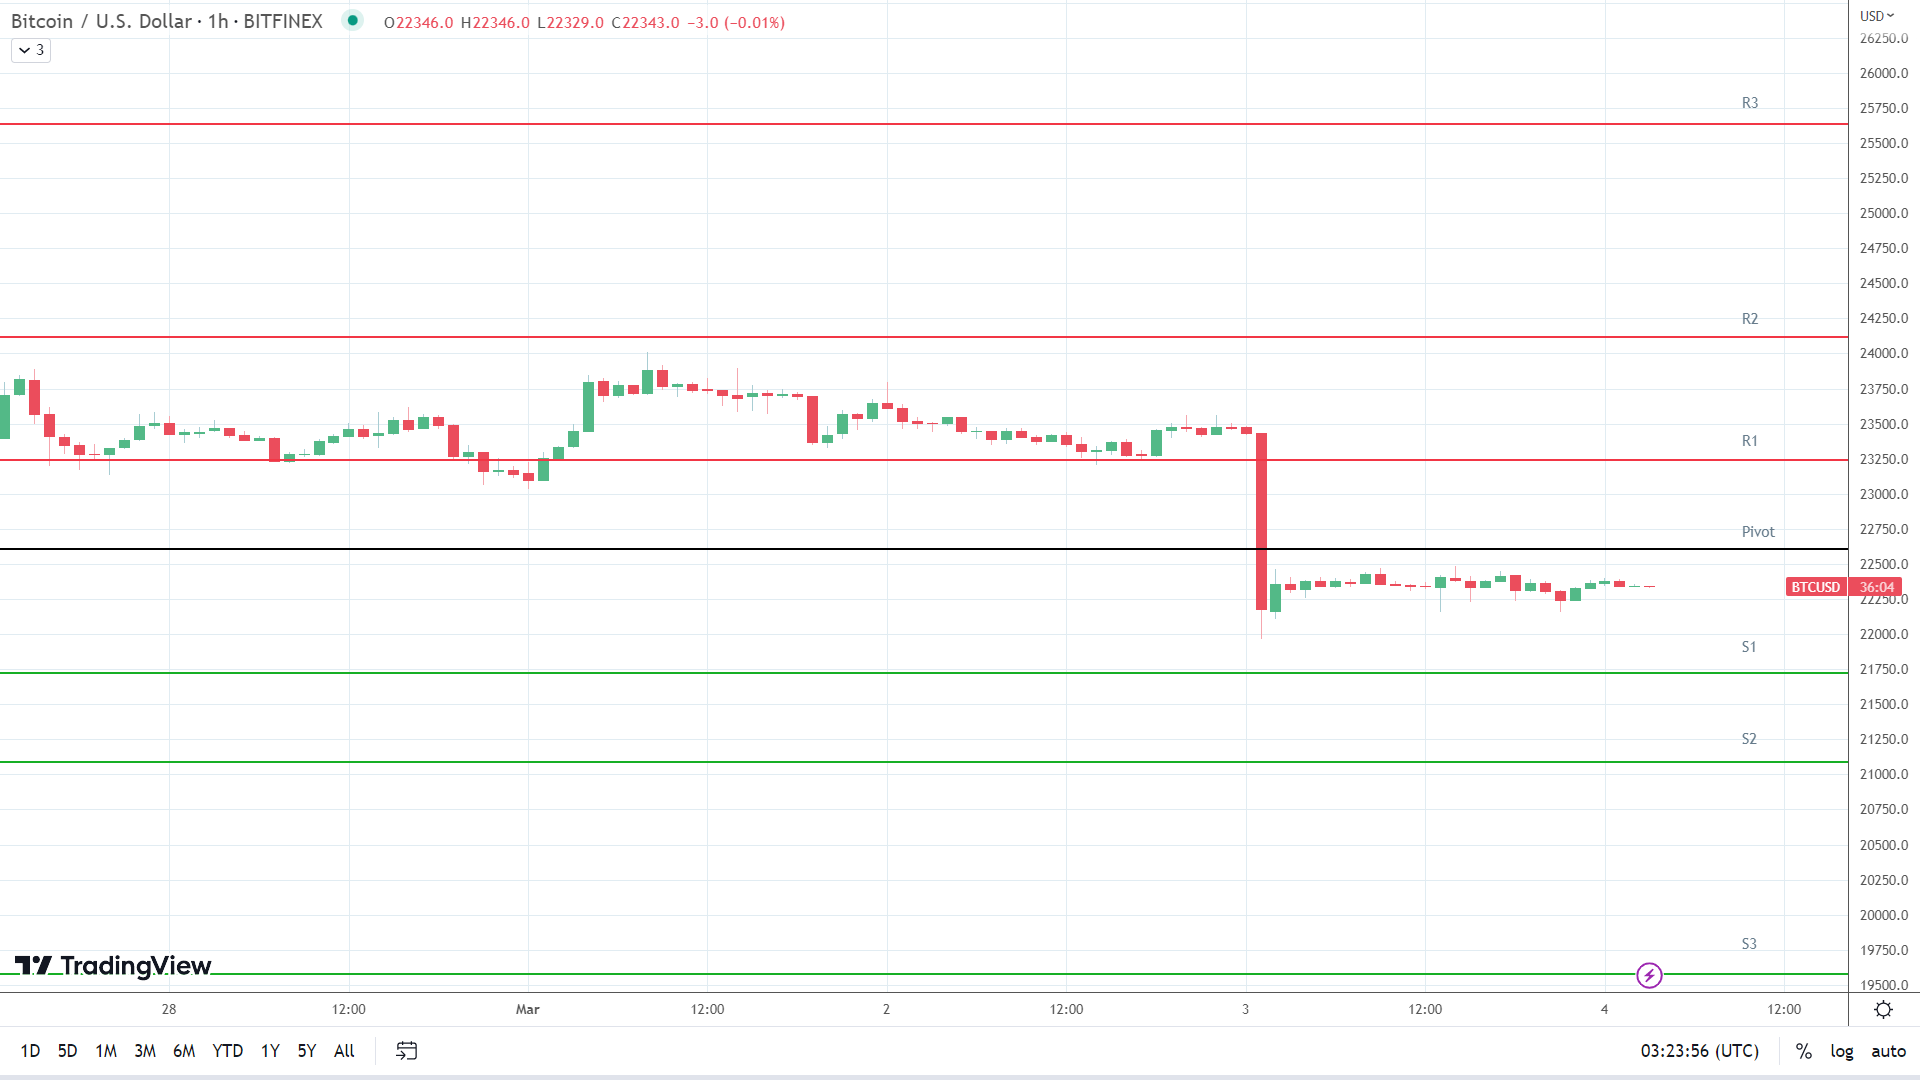 BTC support levels are in play below the pivot.